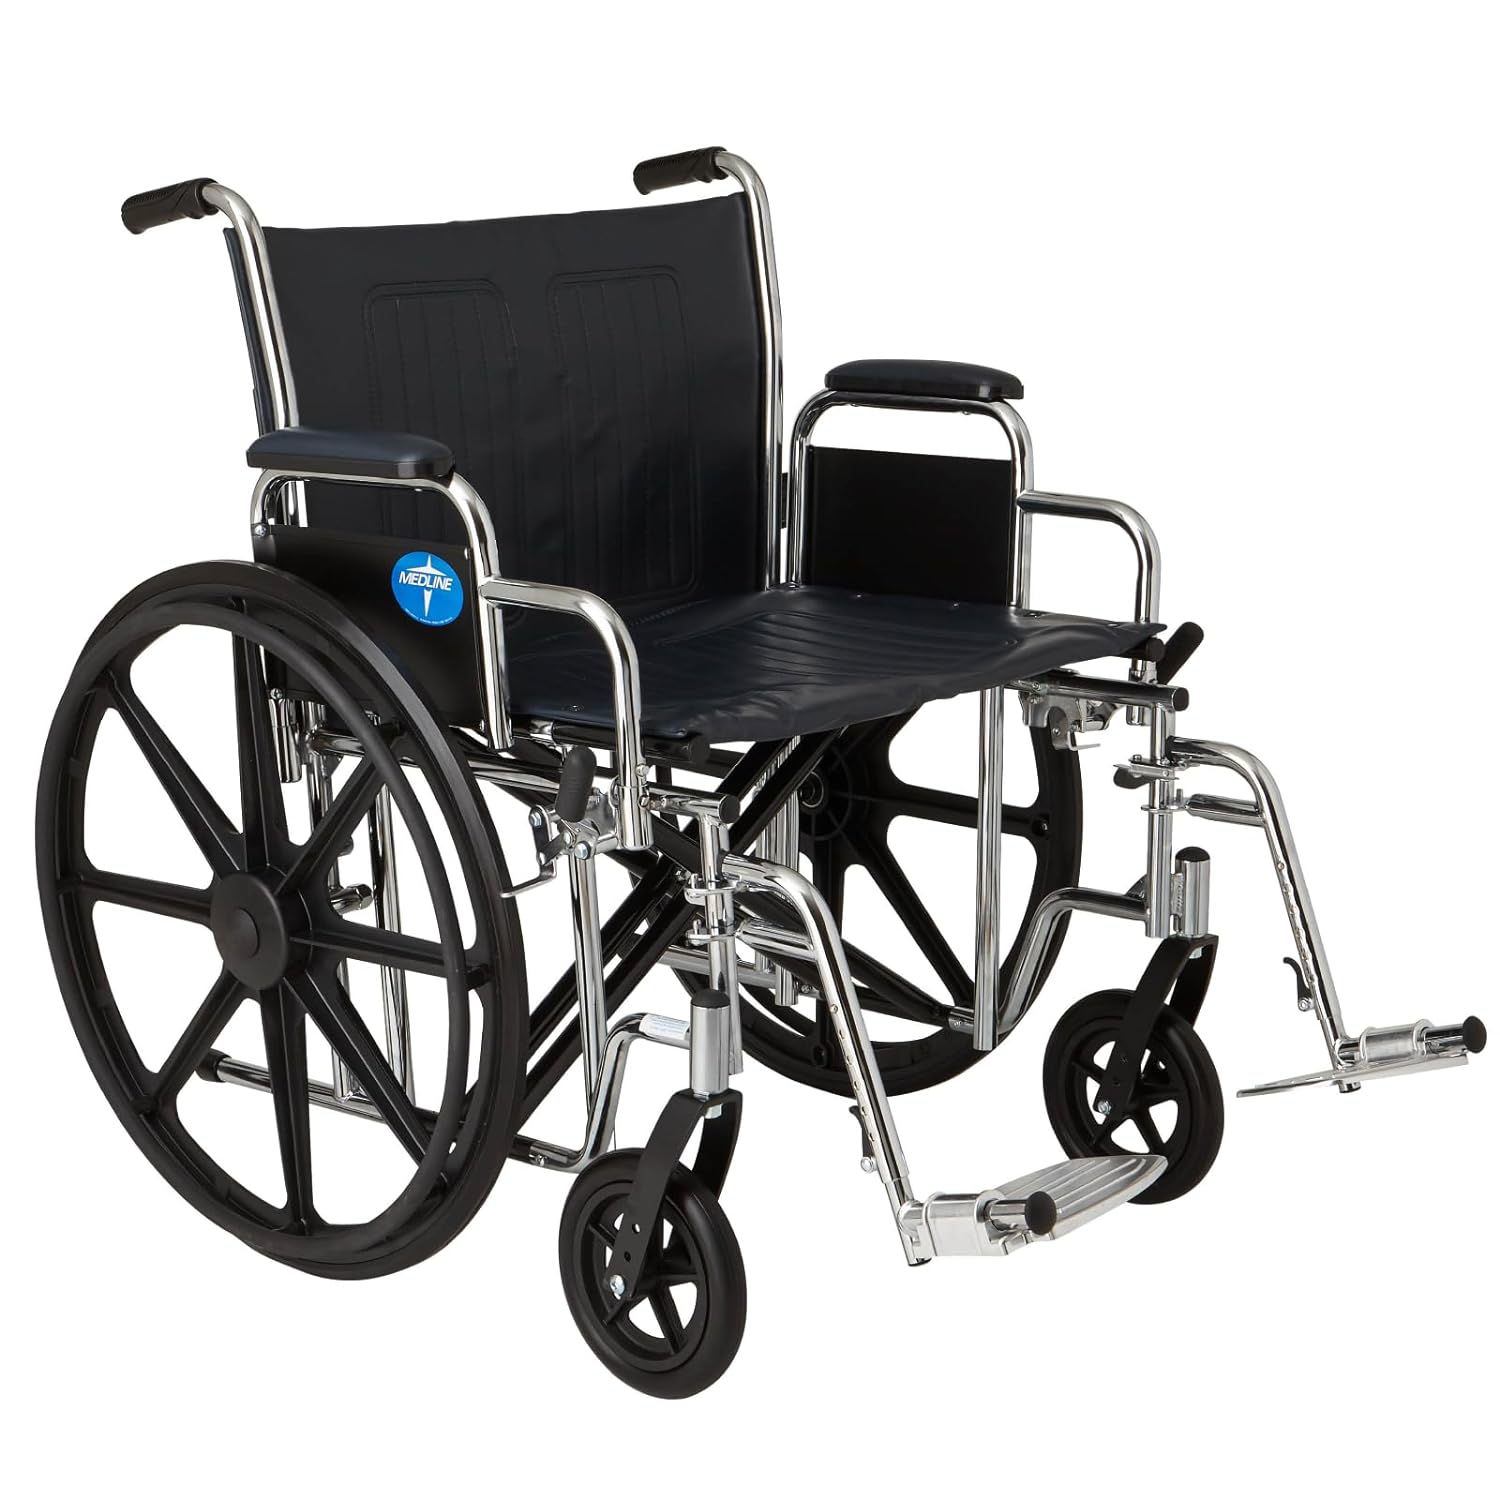 Medline Excel Extra-Wide Bariatric Wheelchair Review